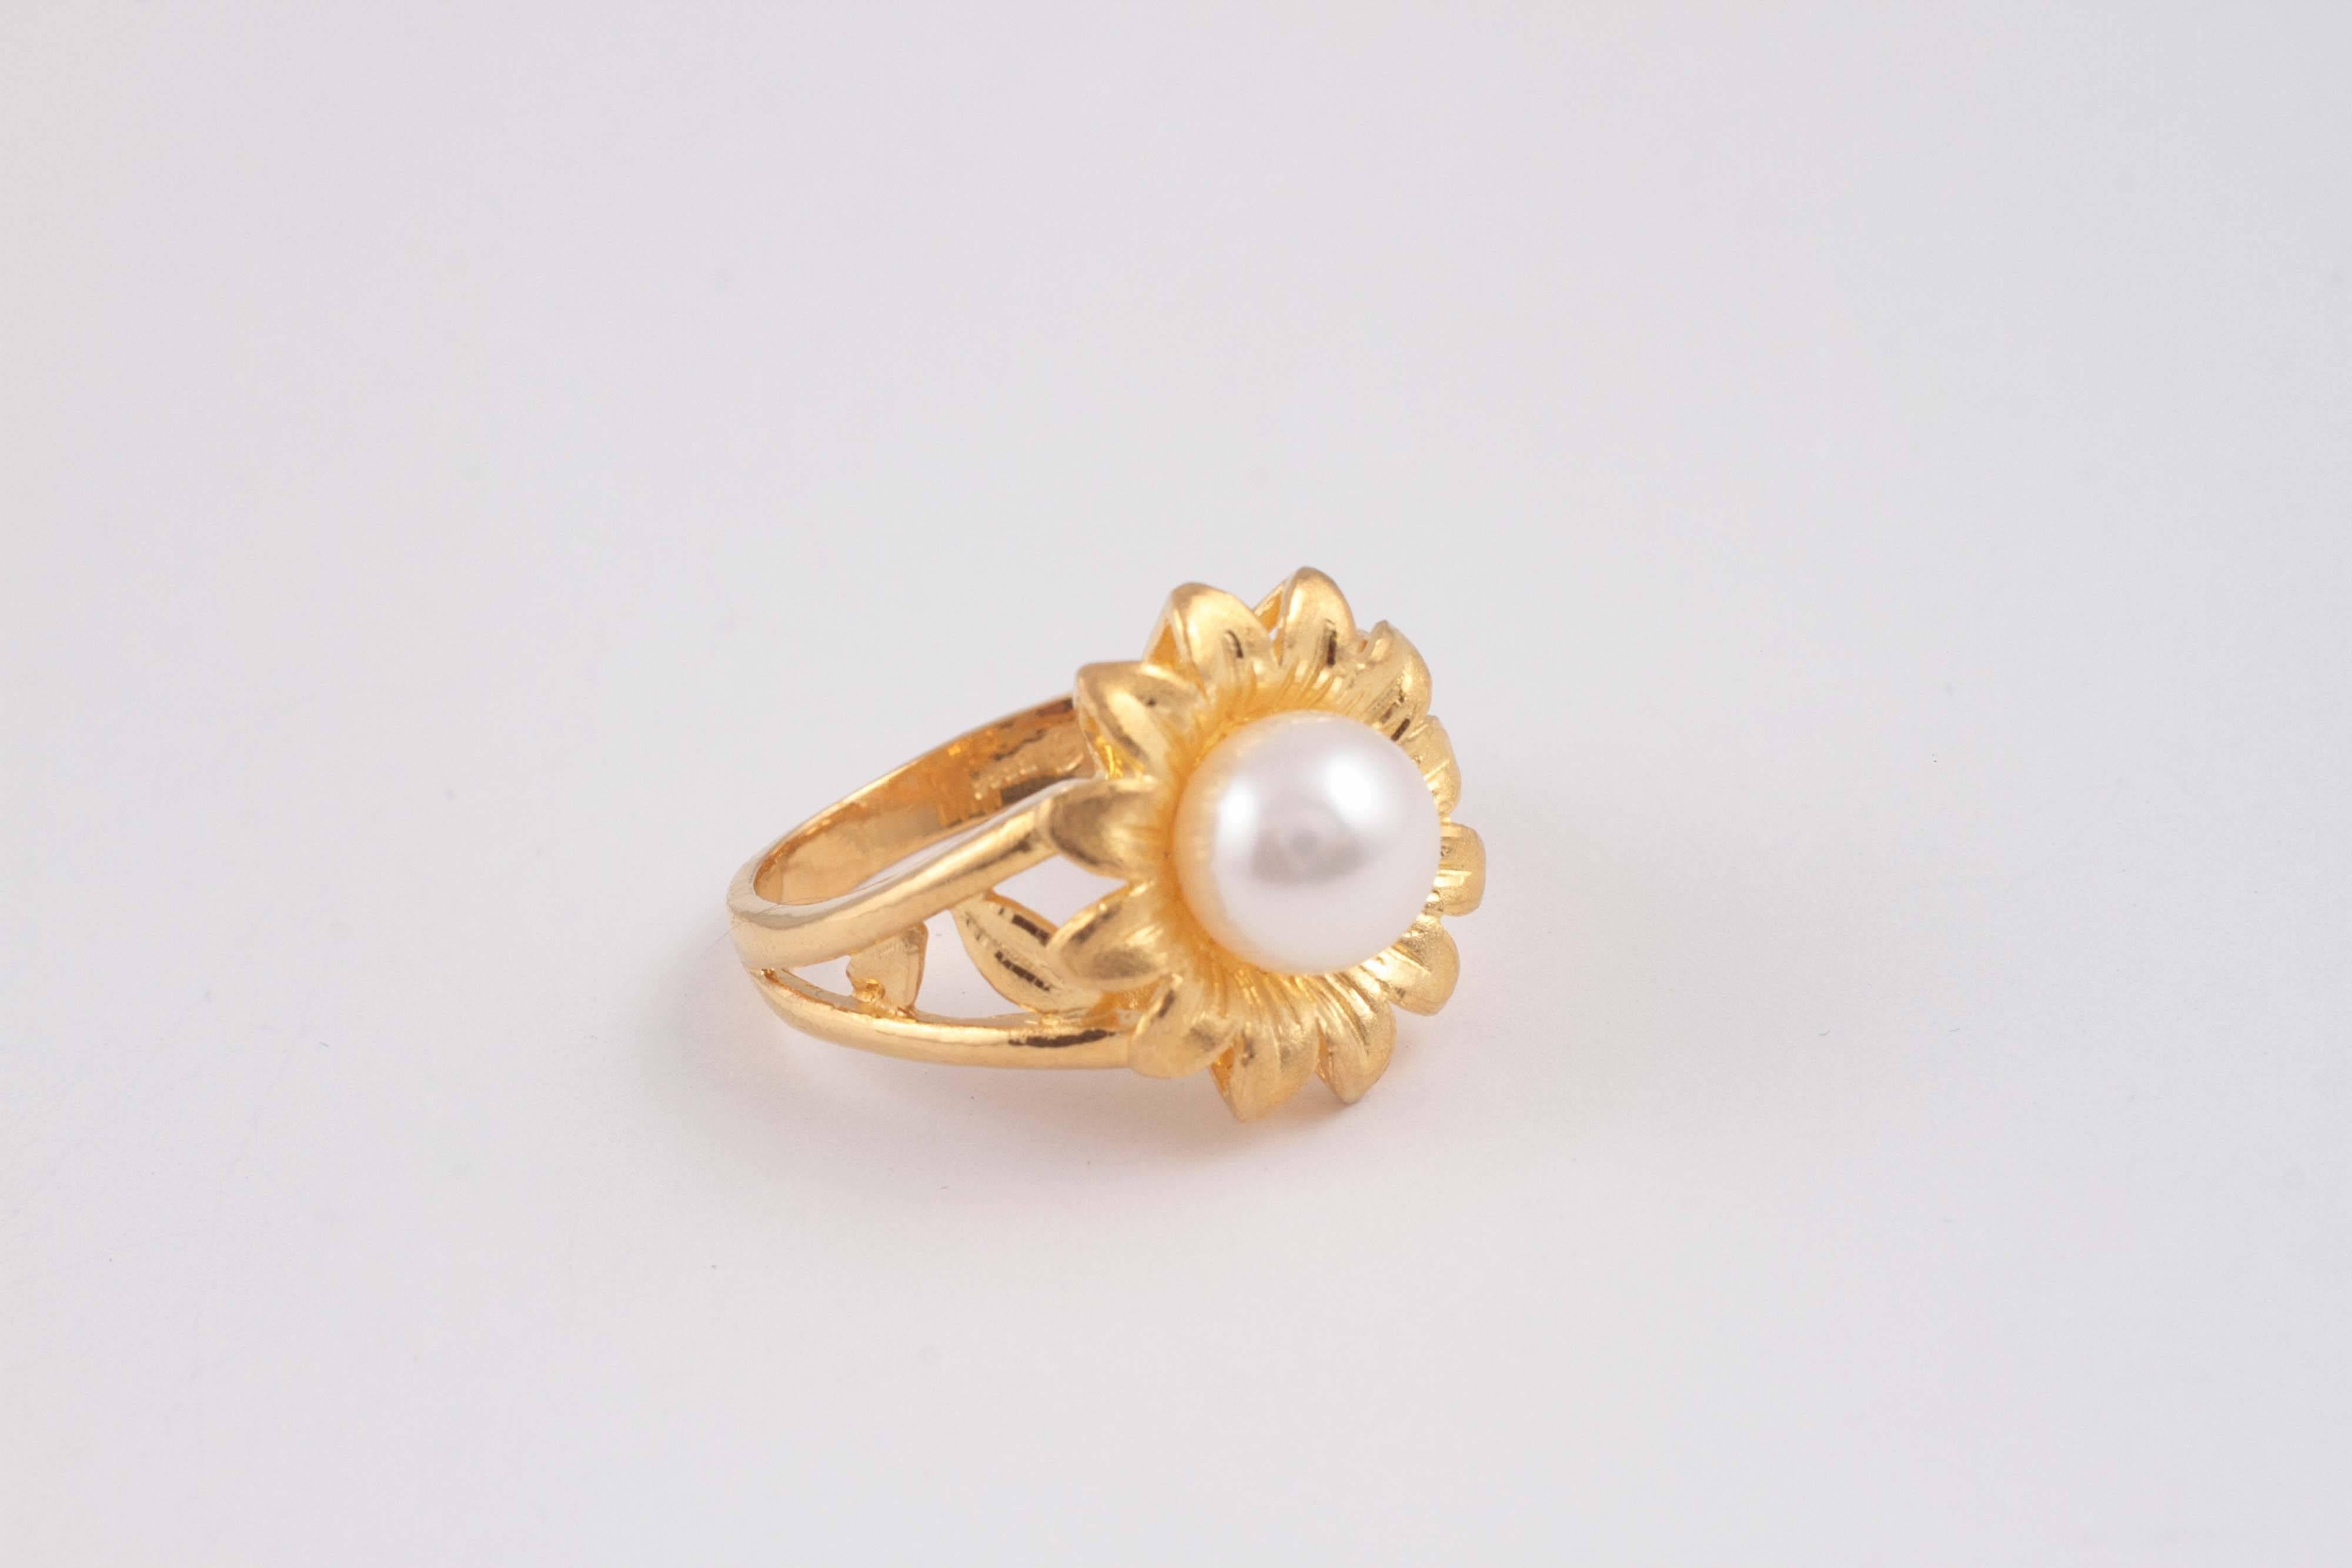 Centered with a 8.15 mm, cultured pearl, this flower ring is lovely!  Size 8 1/4.